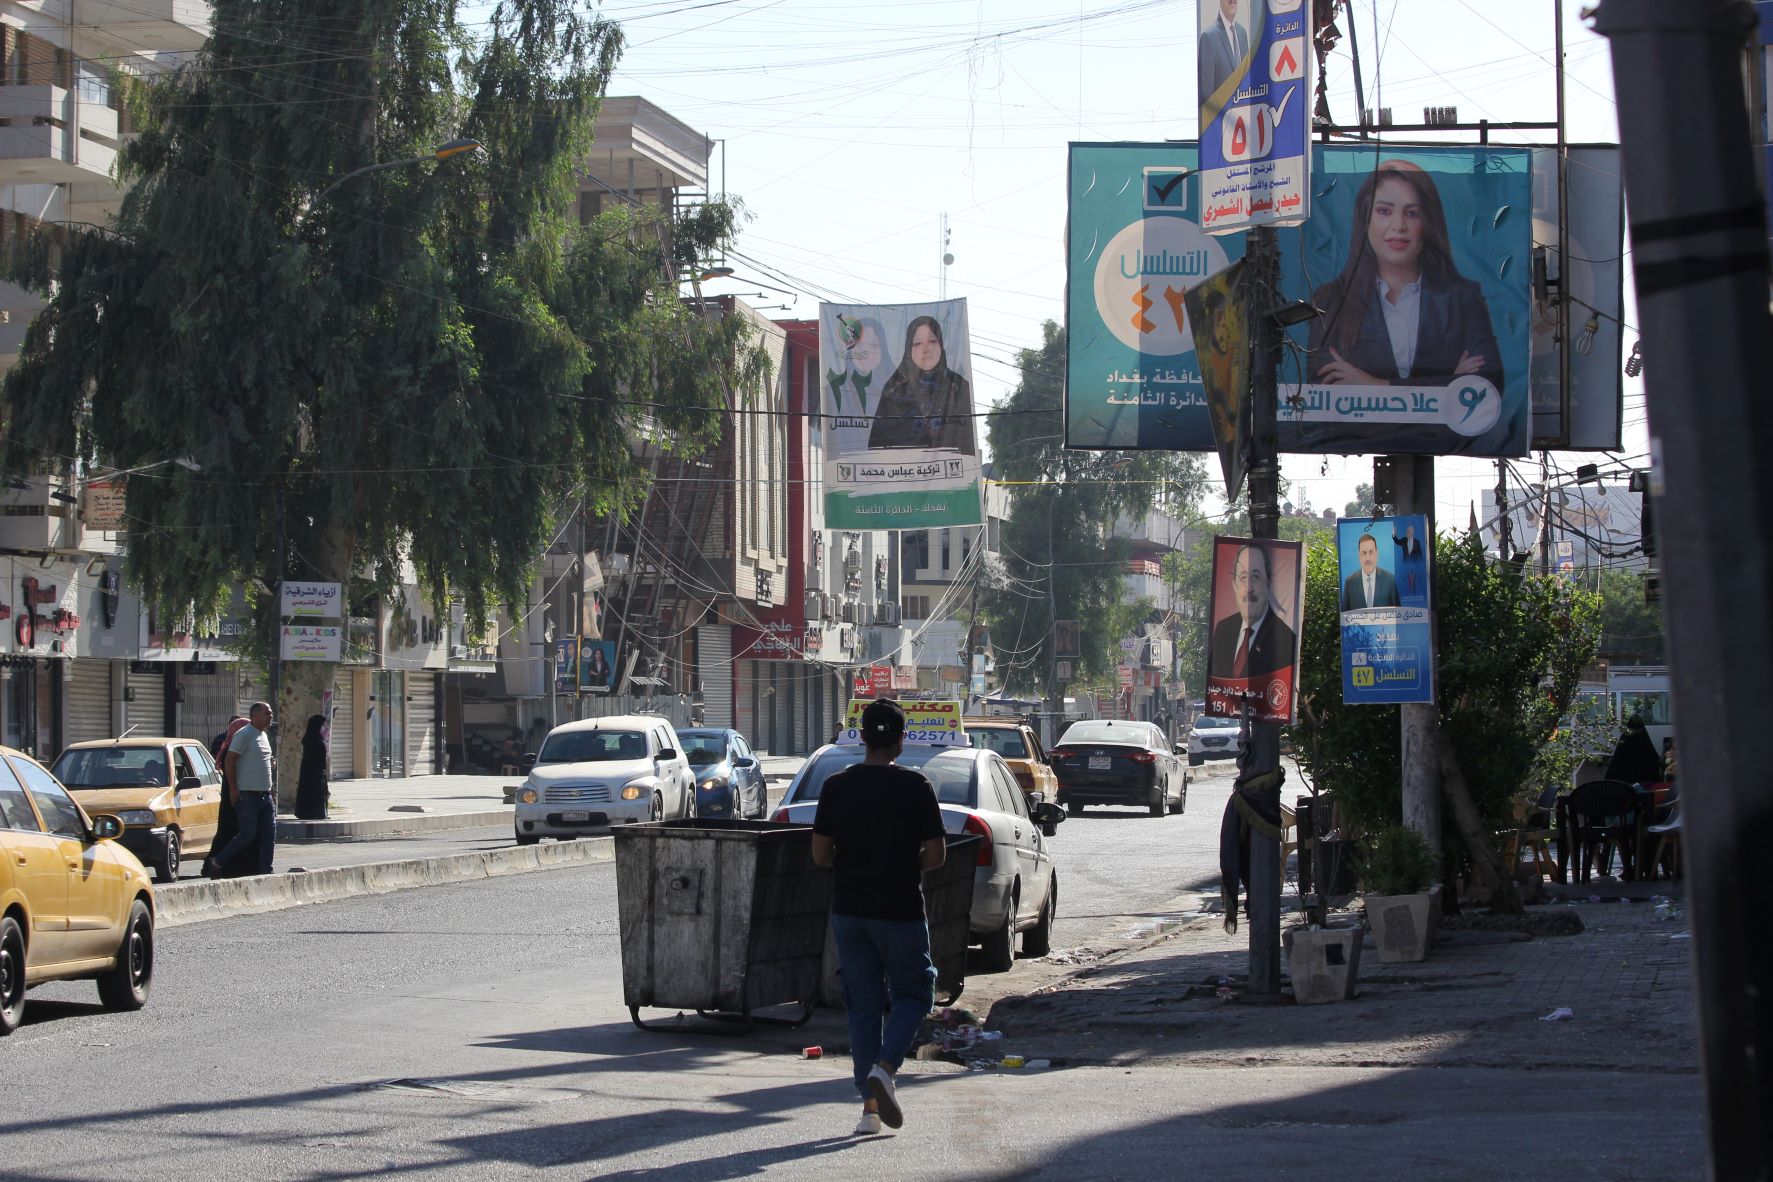 A man walks down a street in Karrada, Baghdad in October 2021 surrounded by election posters (MEE/Alex MacDonald)